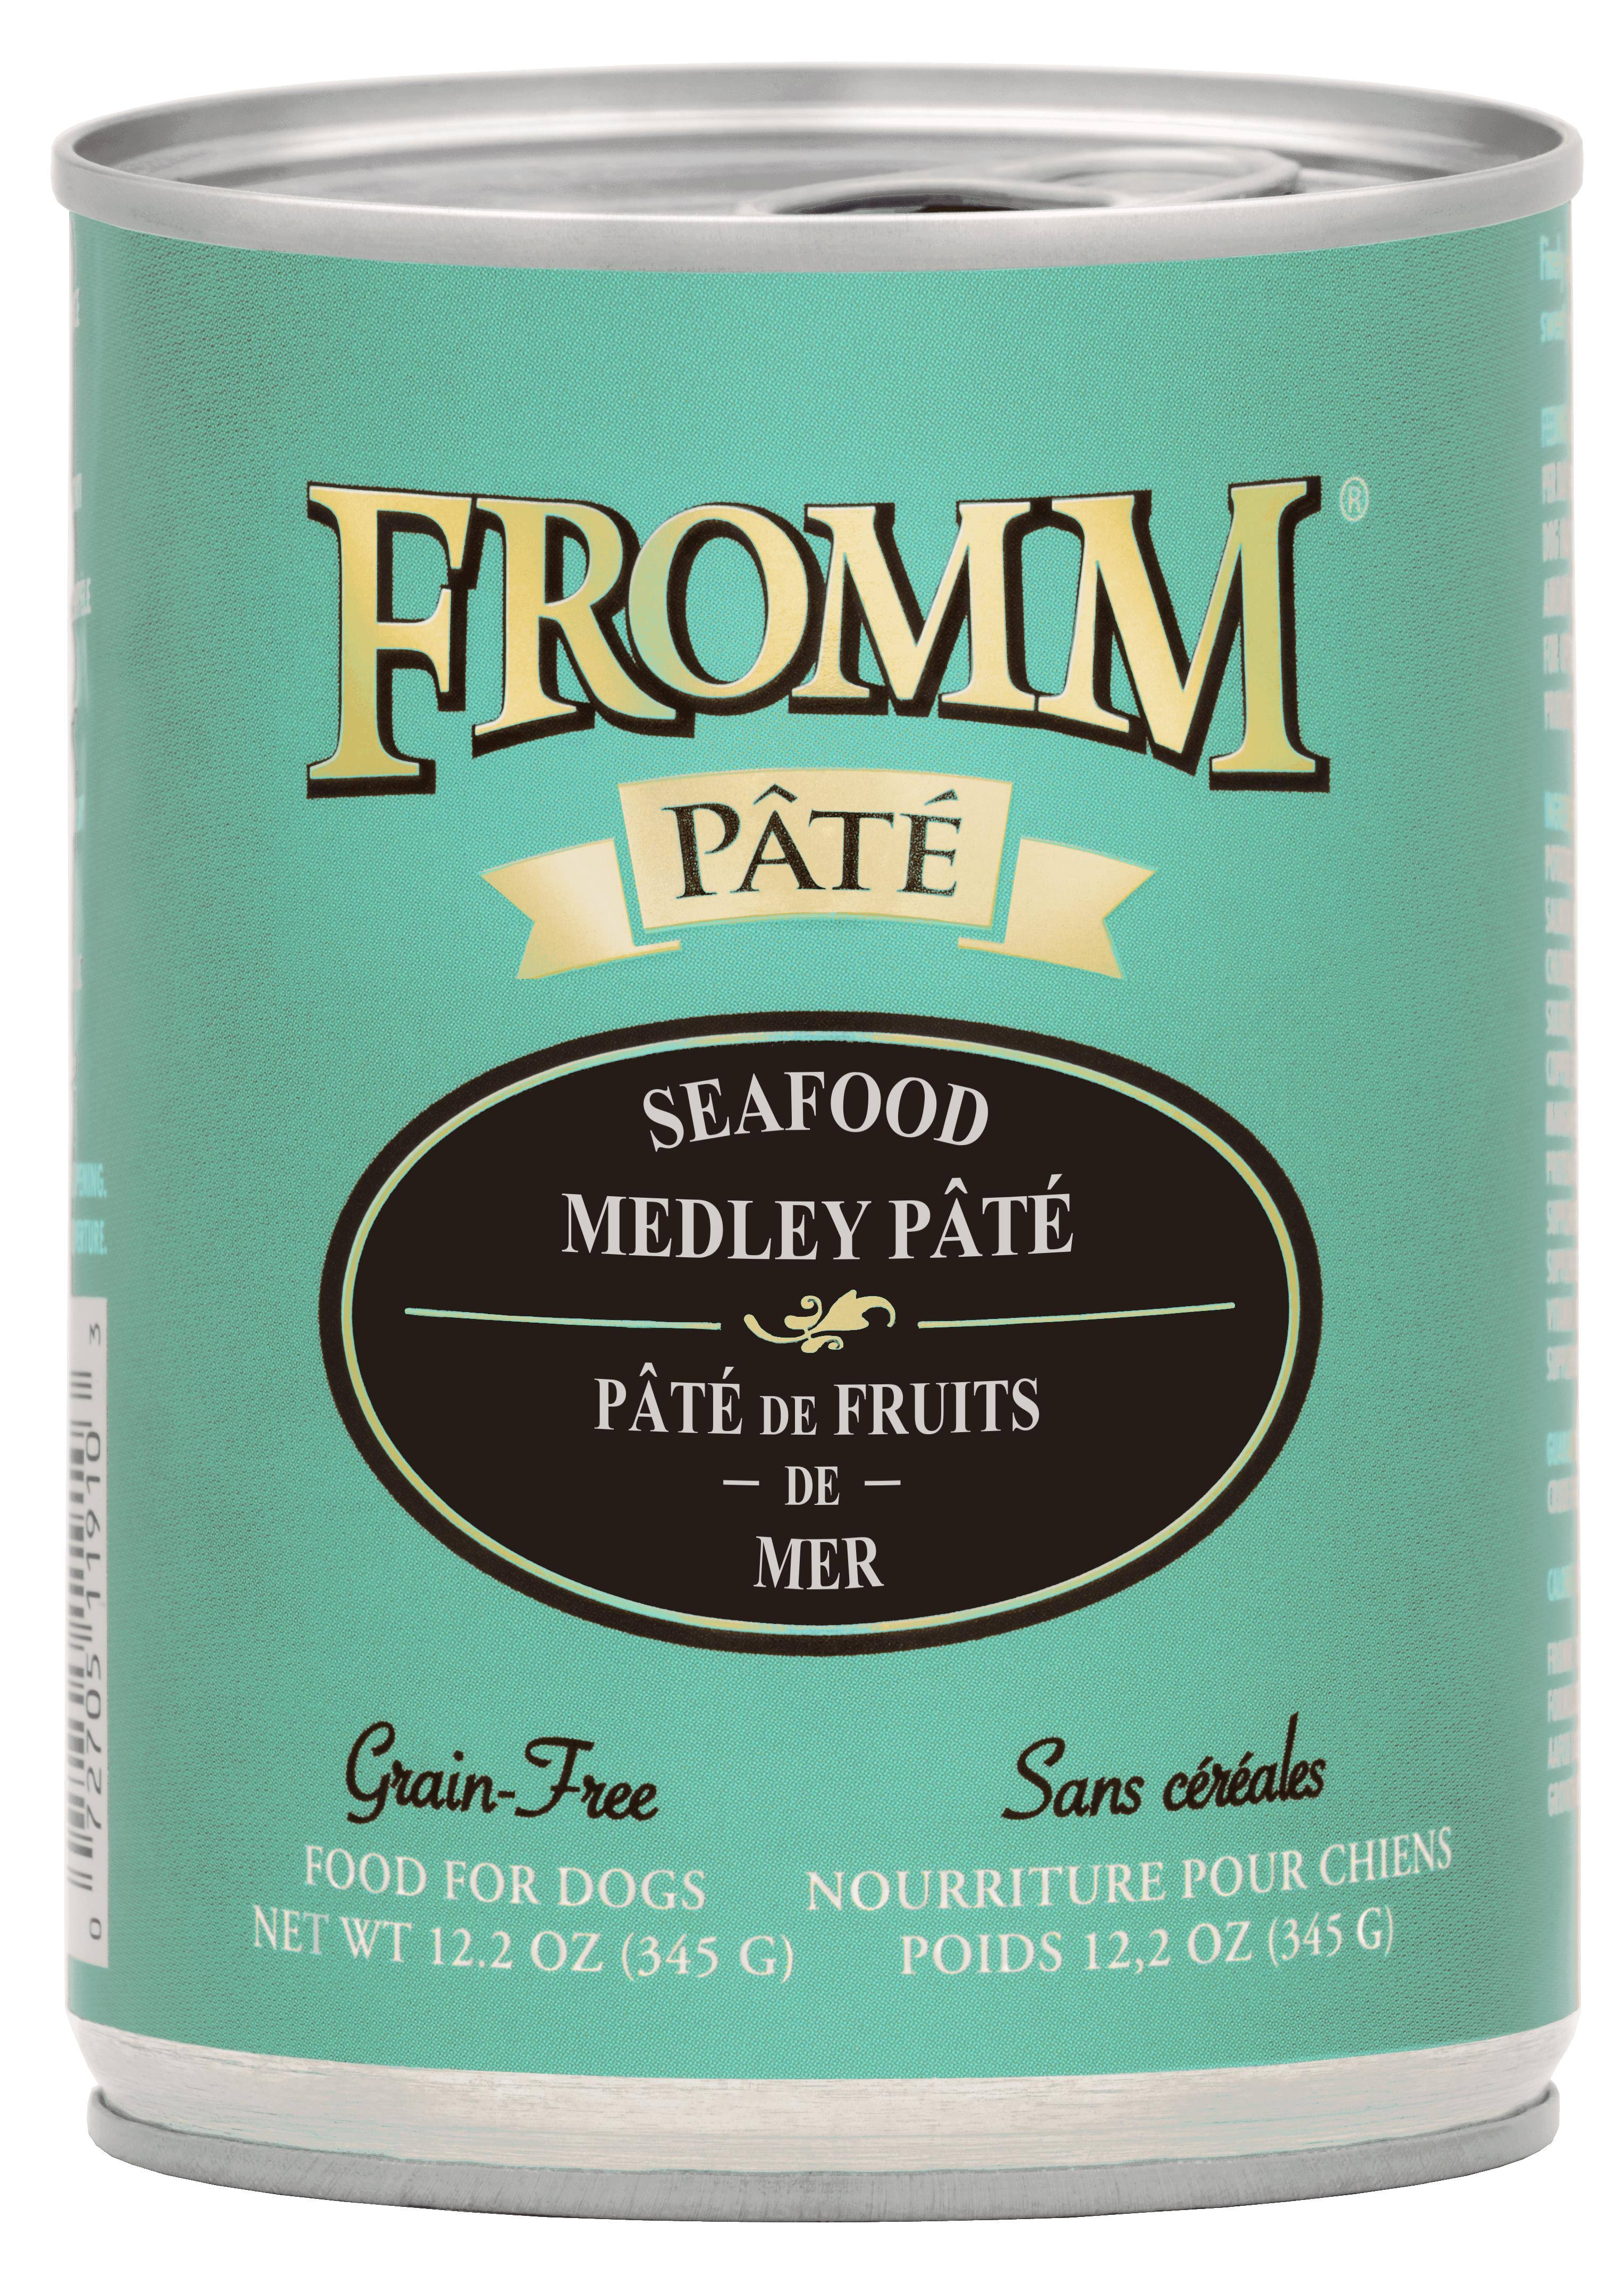 Fromm Dog Food - Grain Free Seafood Medley Pate - 12.2 oz.